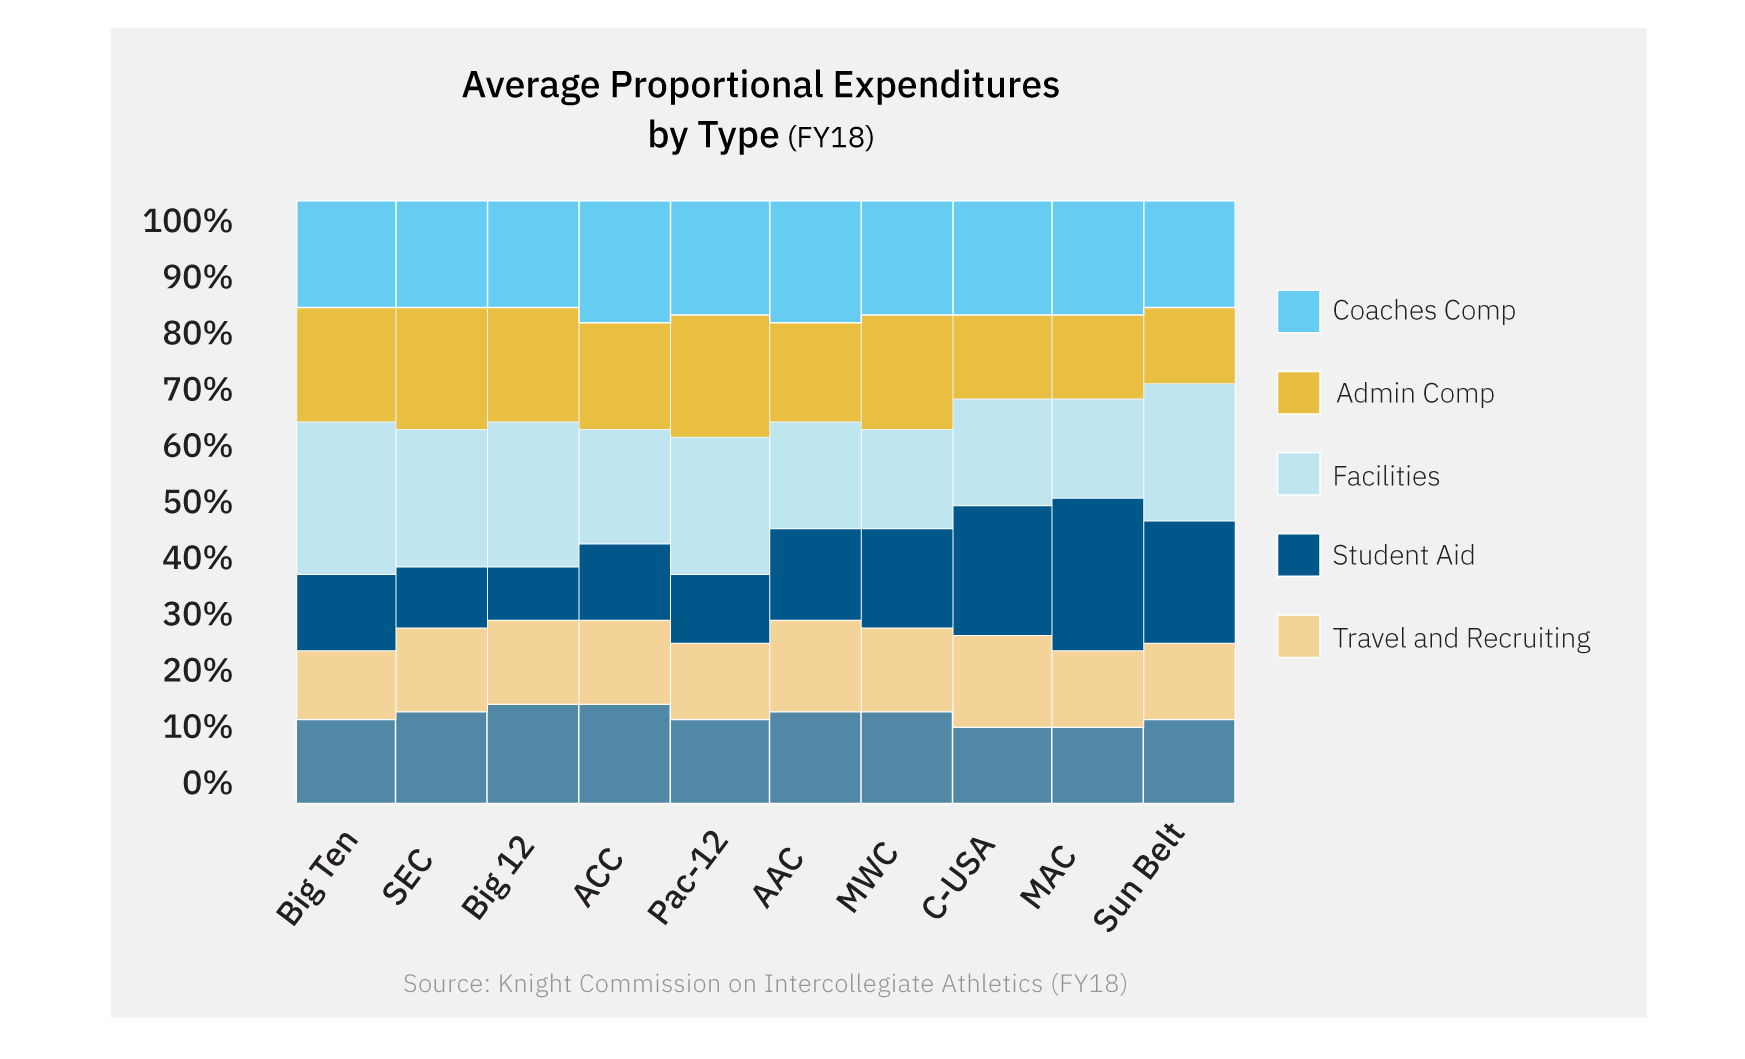 A bar chart of average proportional expenditures by type for fiscal year 2018